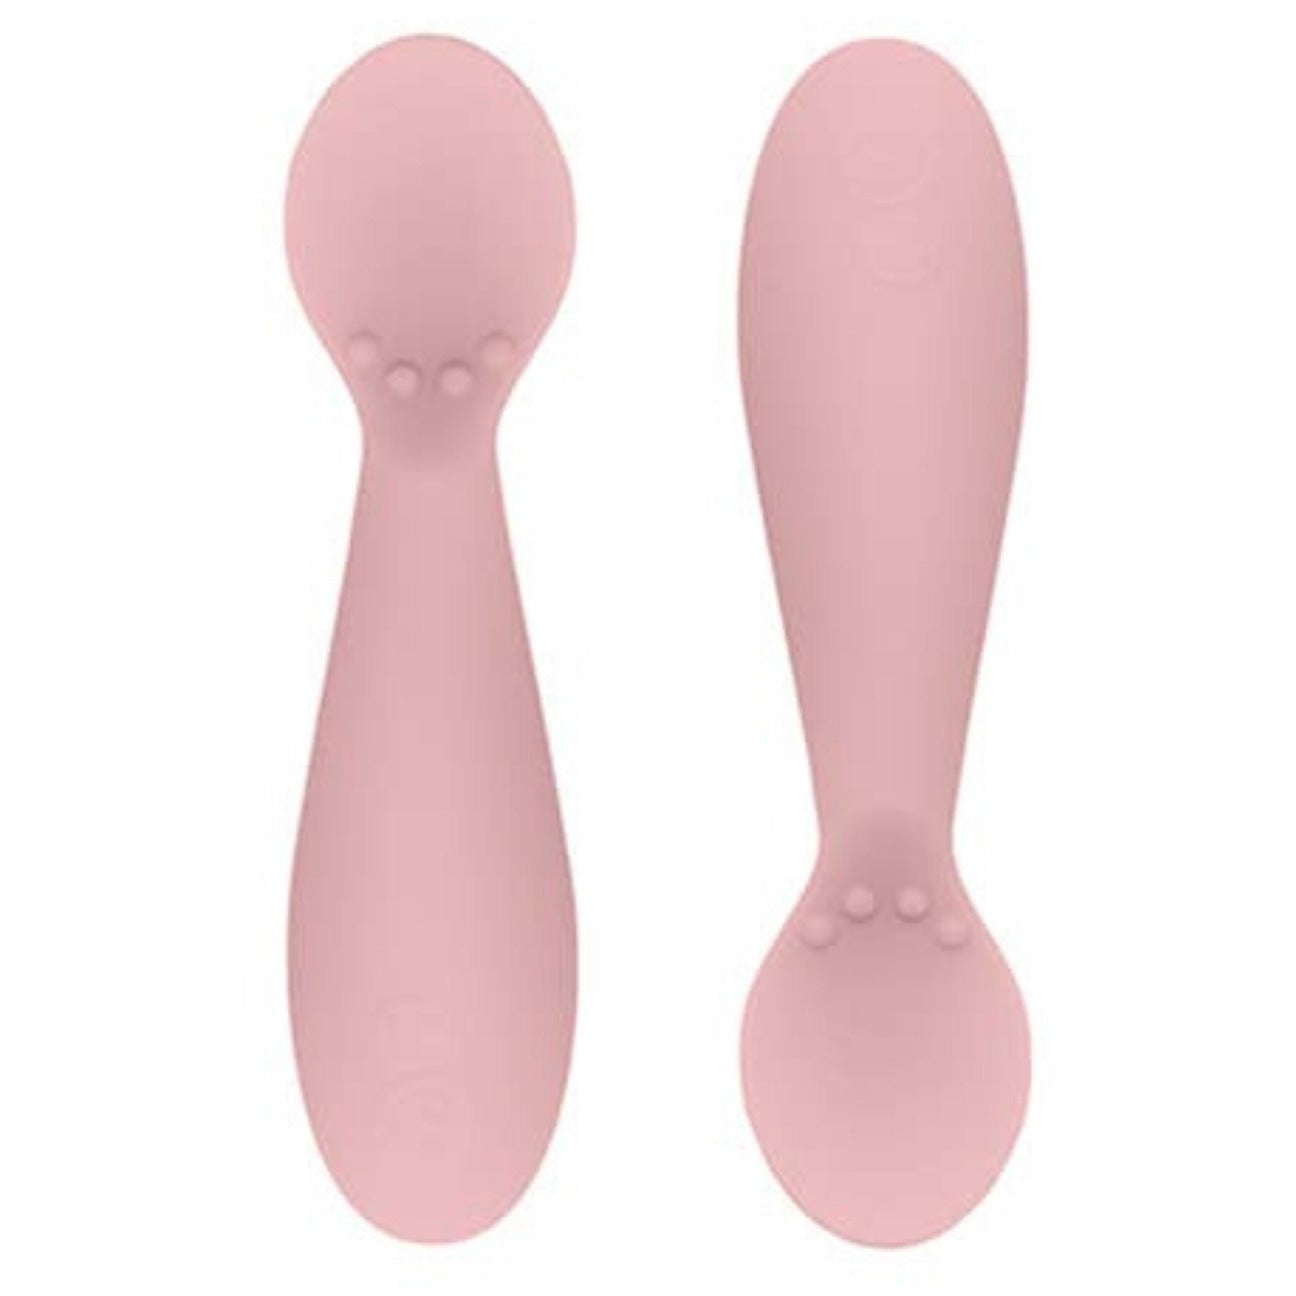 cute silicone infant training spoon and fork in blush pink